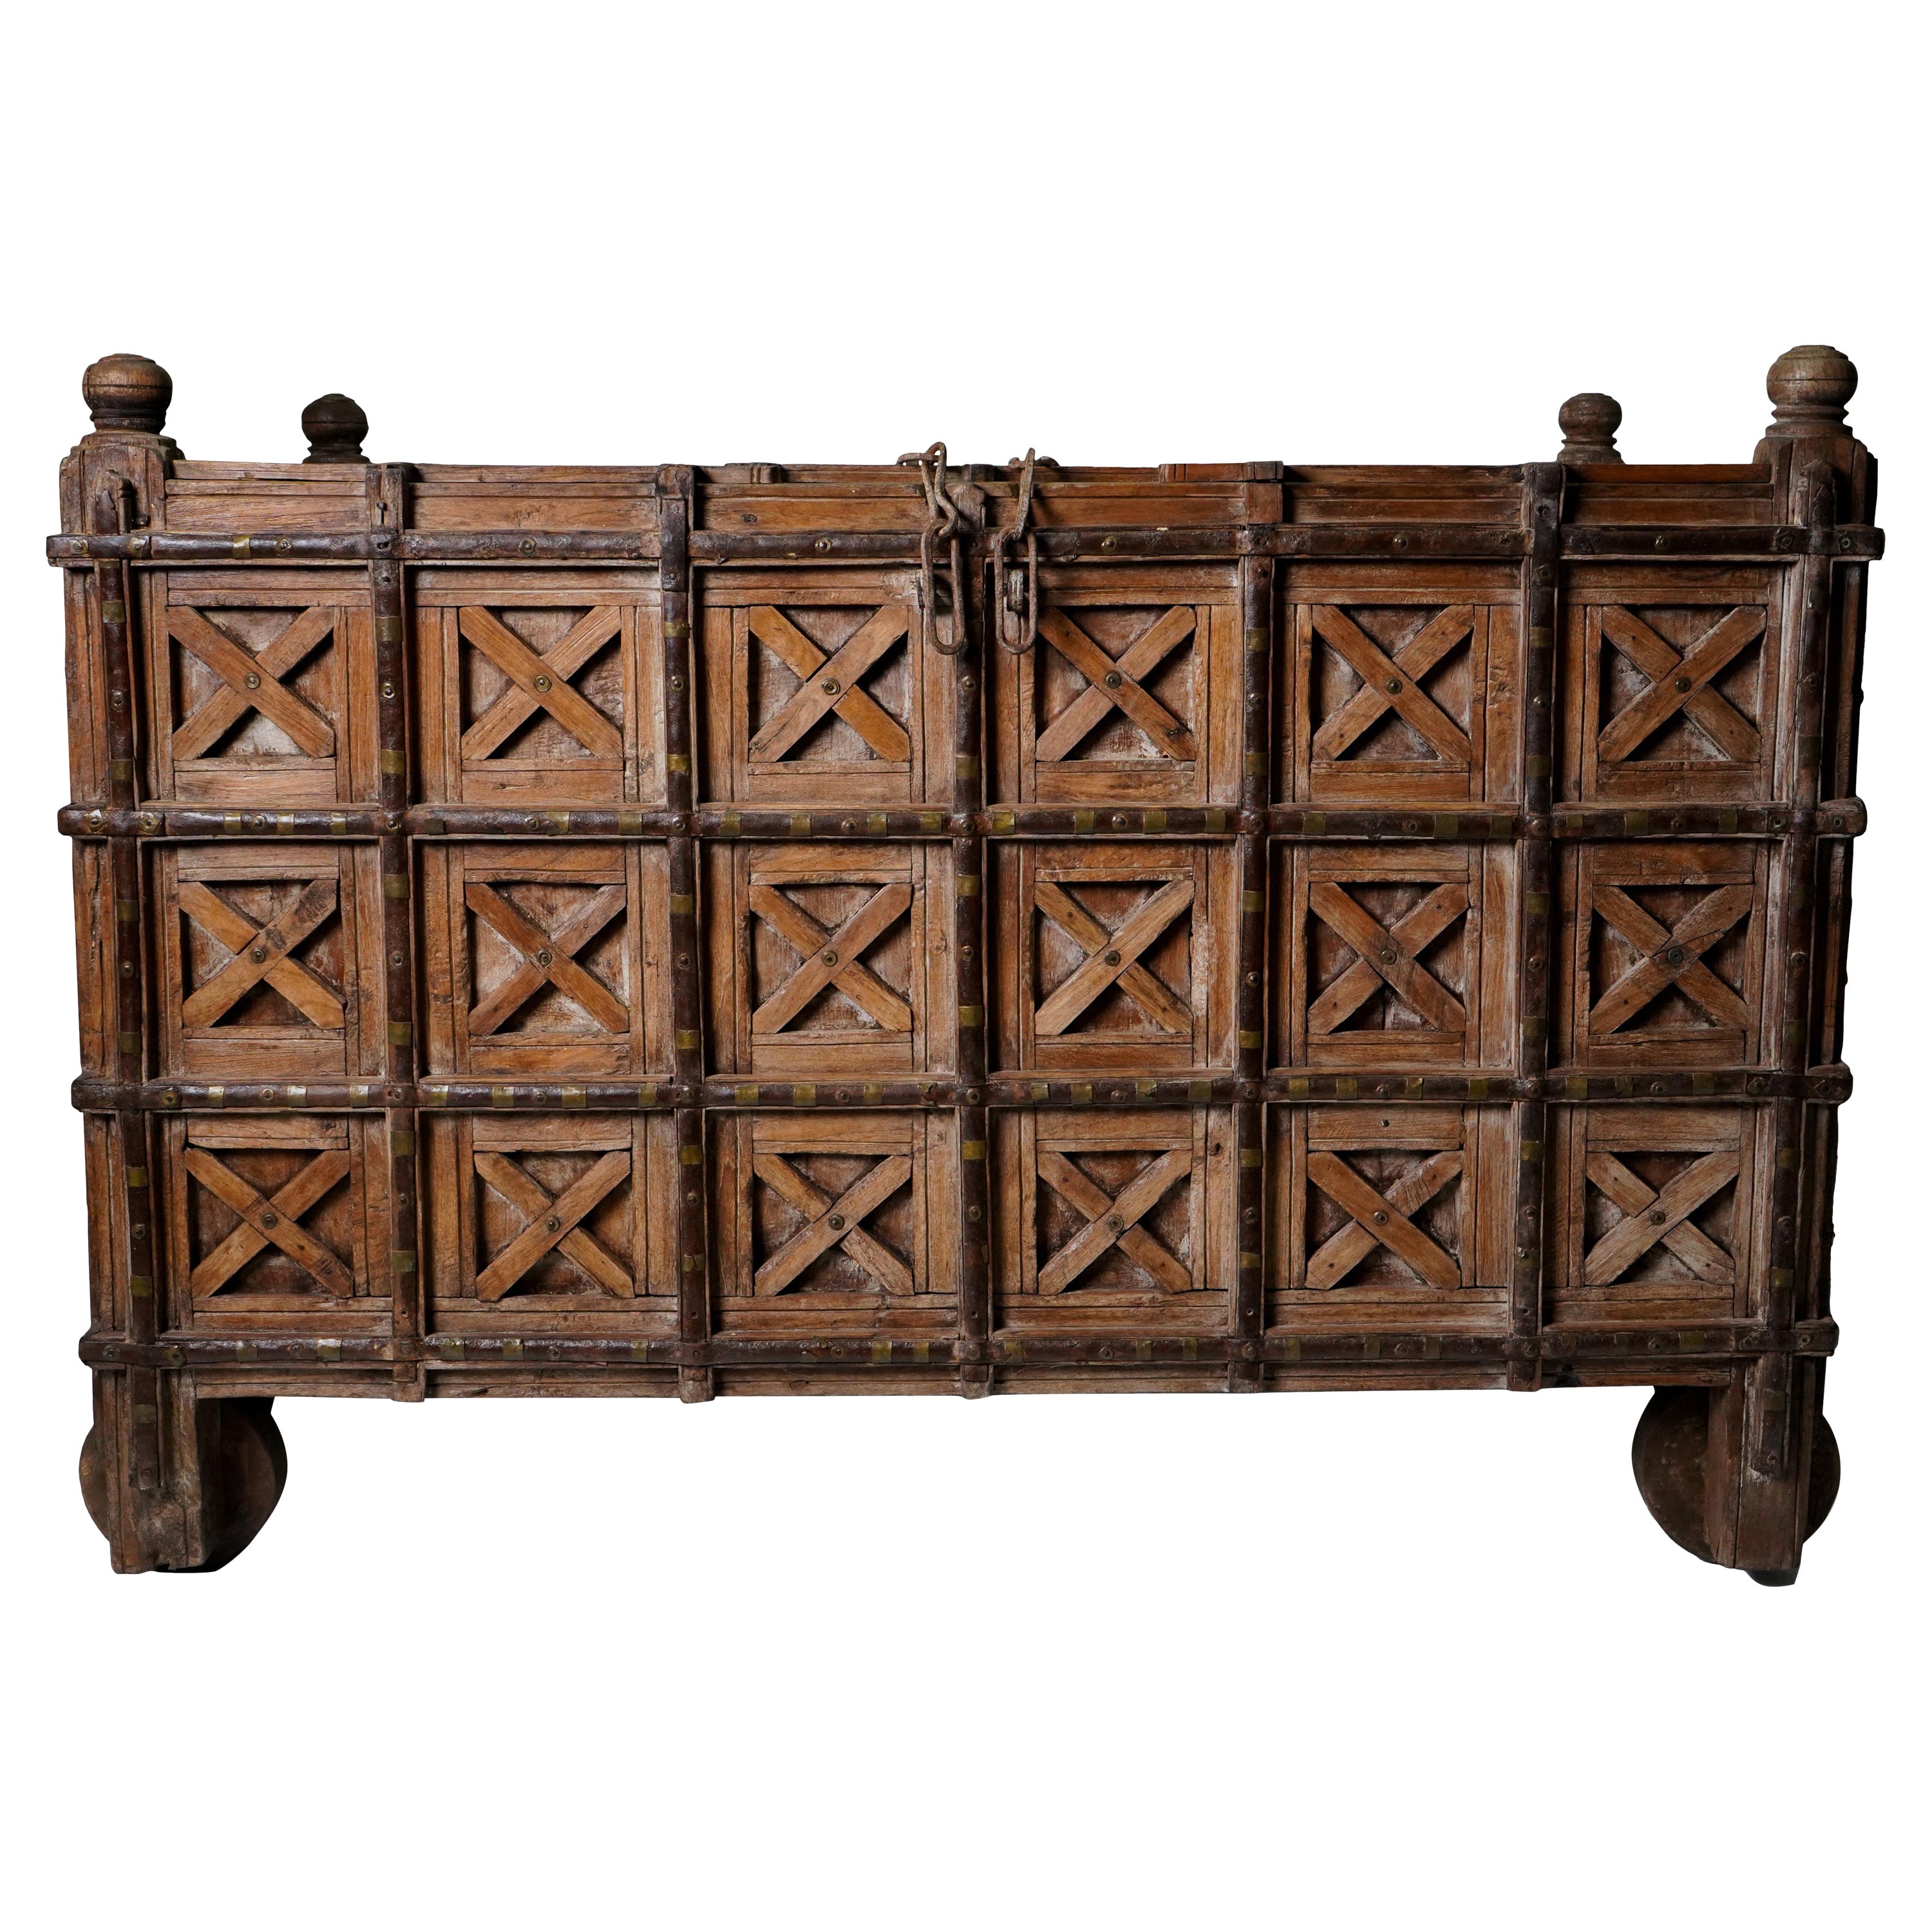 Large Indian Storage Chest on Wheels